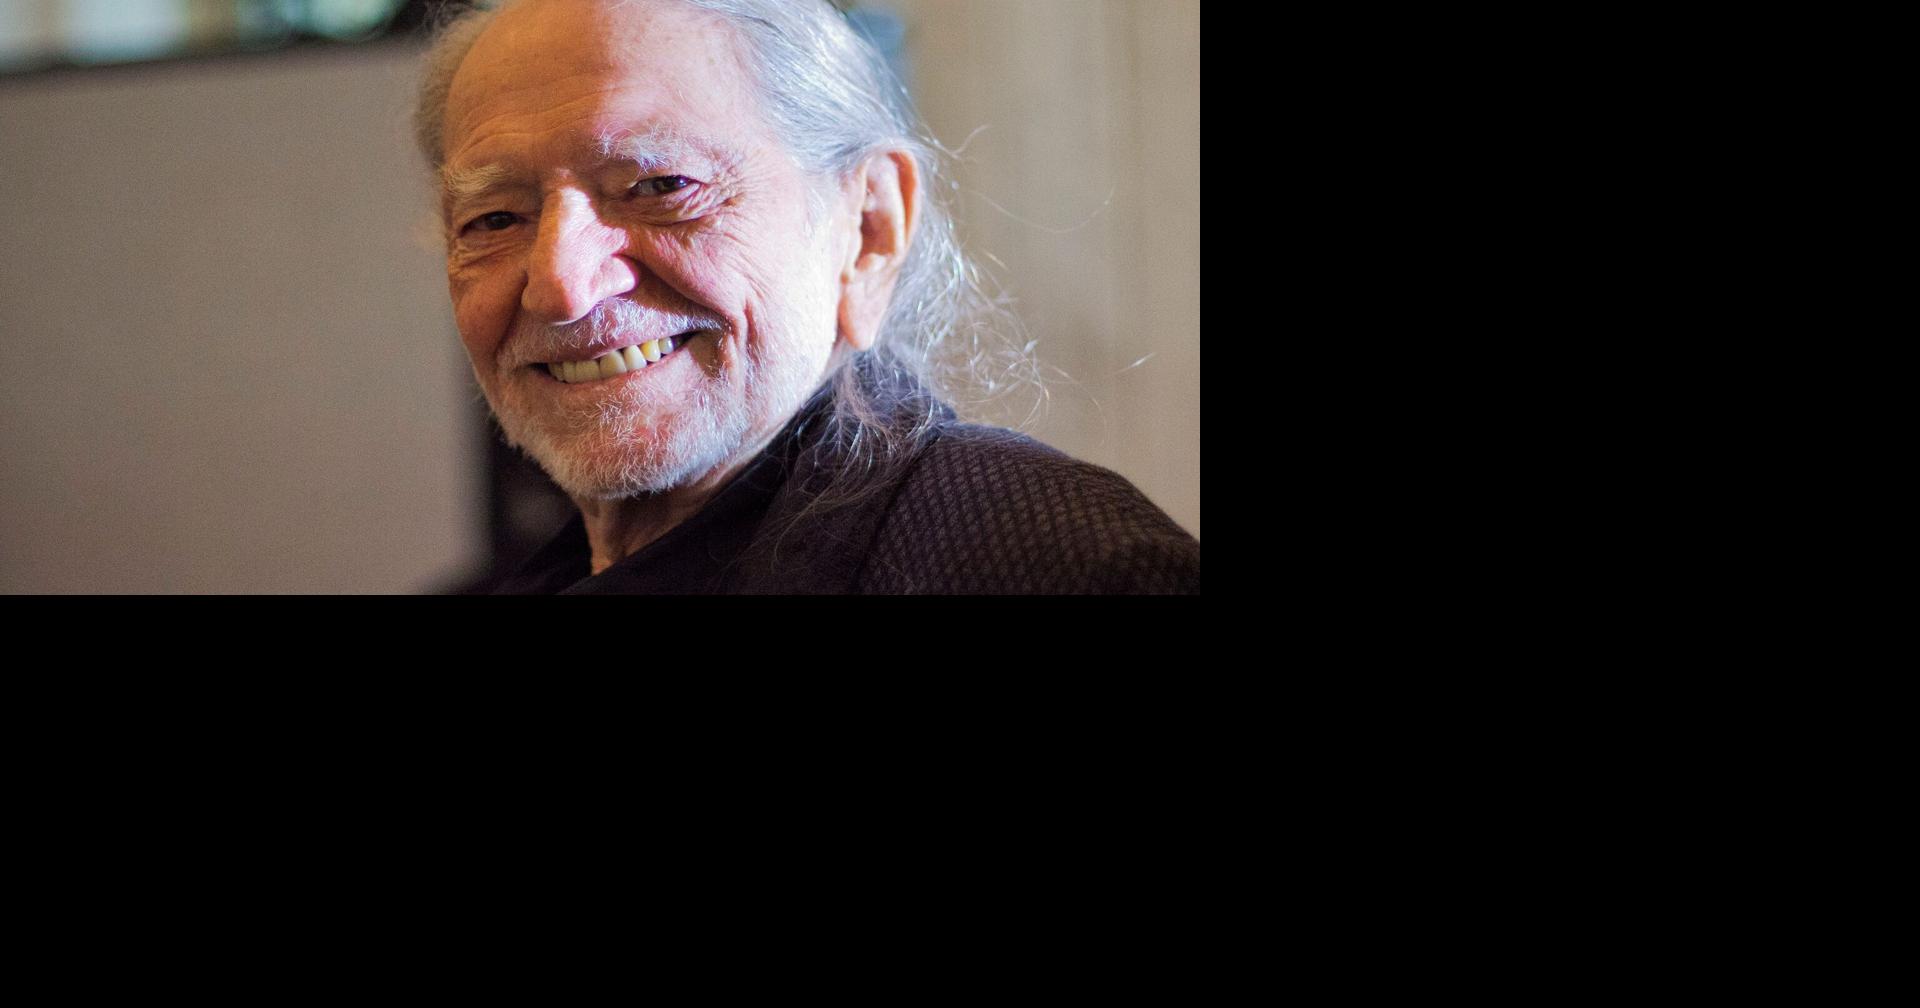 Willie Nelson turns 89 today. A look at his life and career, in images.